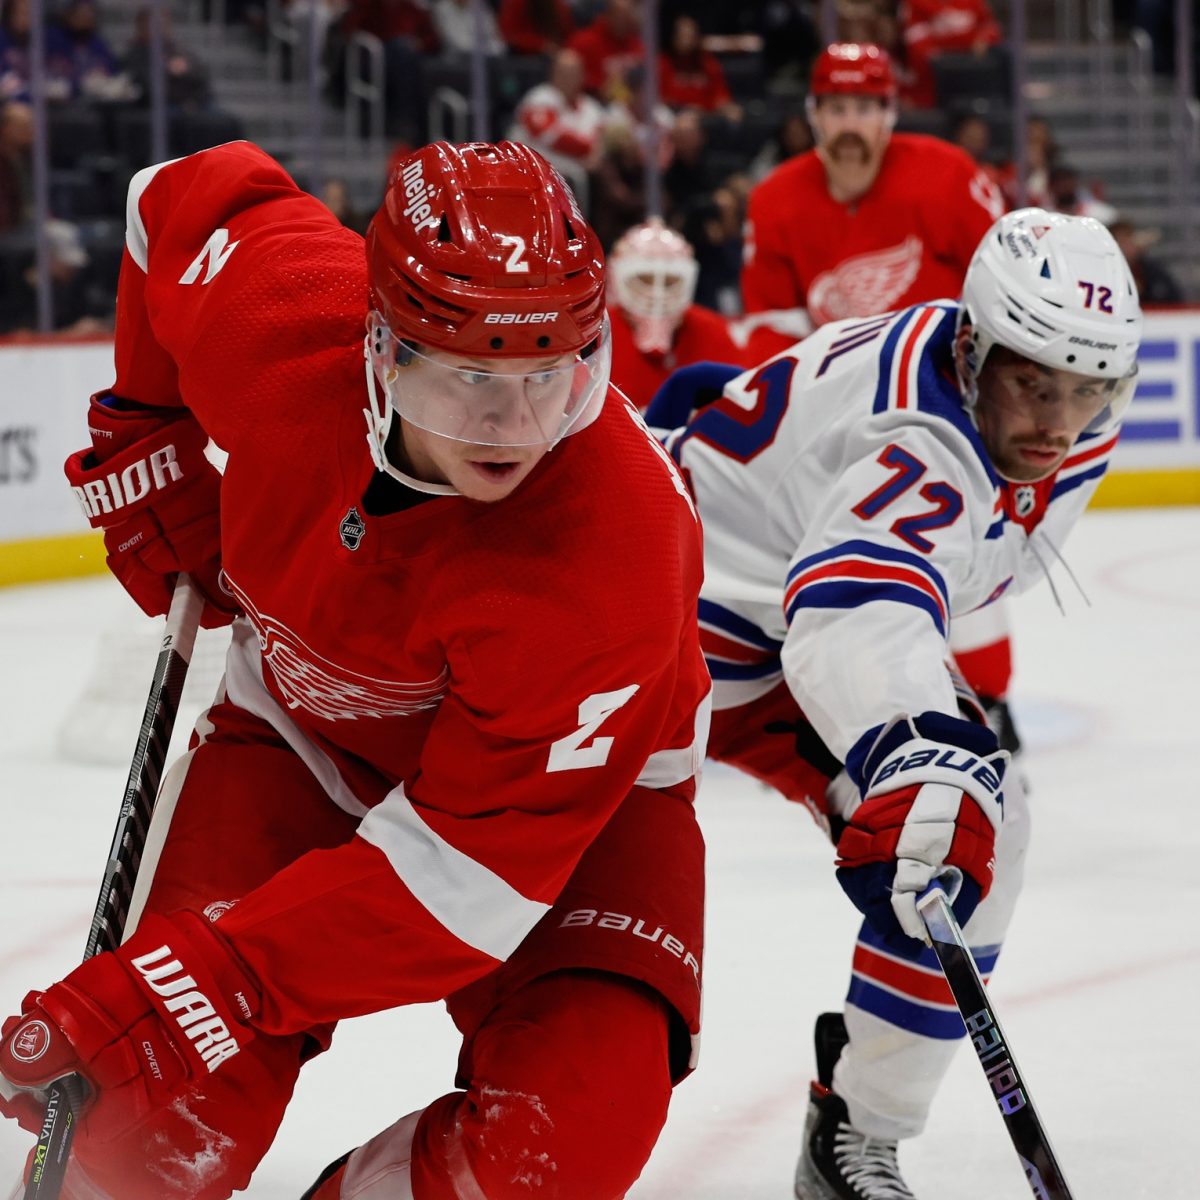 N.Y. Rangers vs. Detroit Red Wings Prediction, Preview, and Odds – 2-23-2023